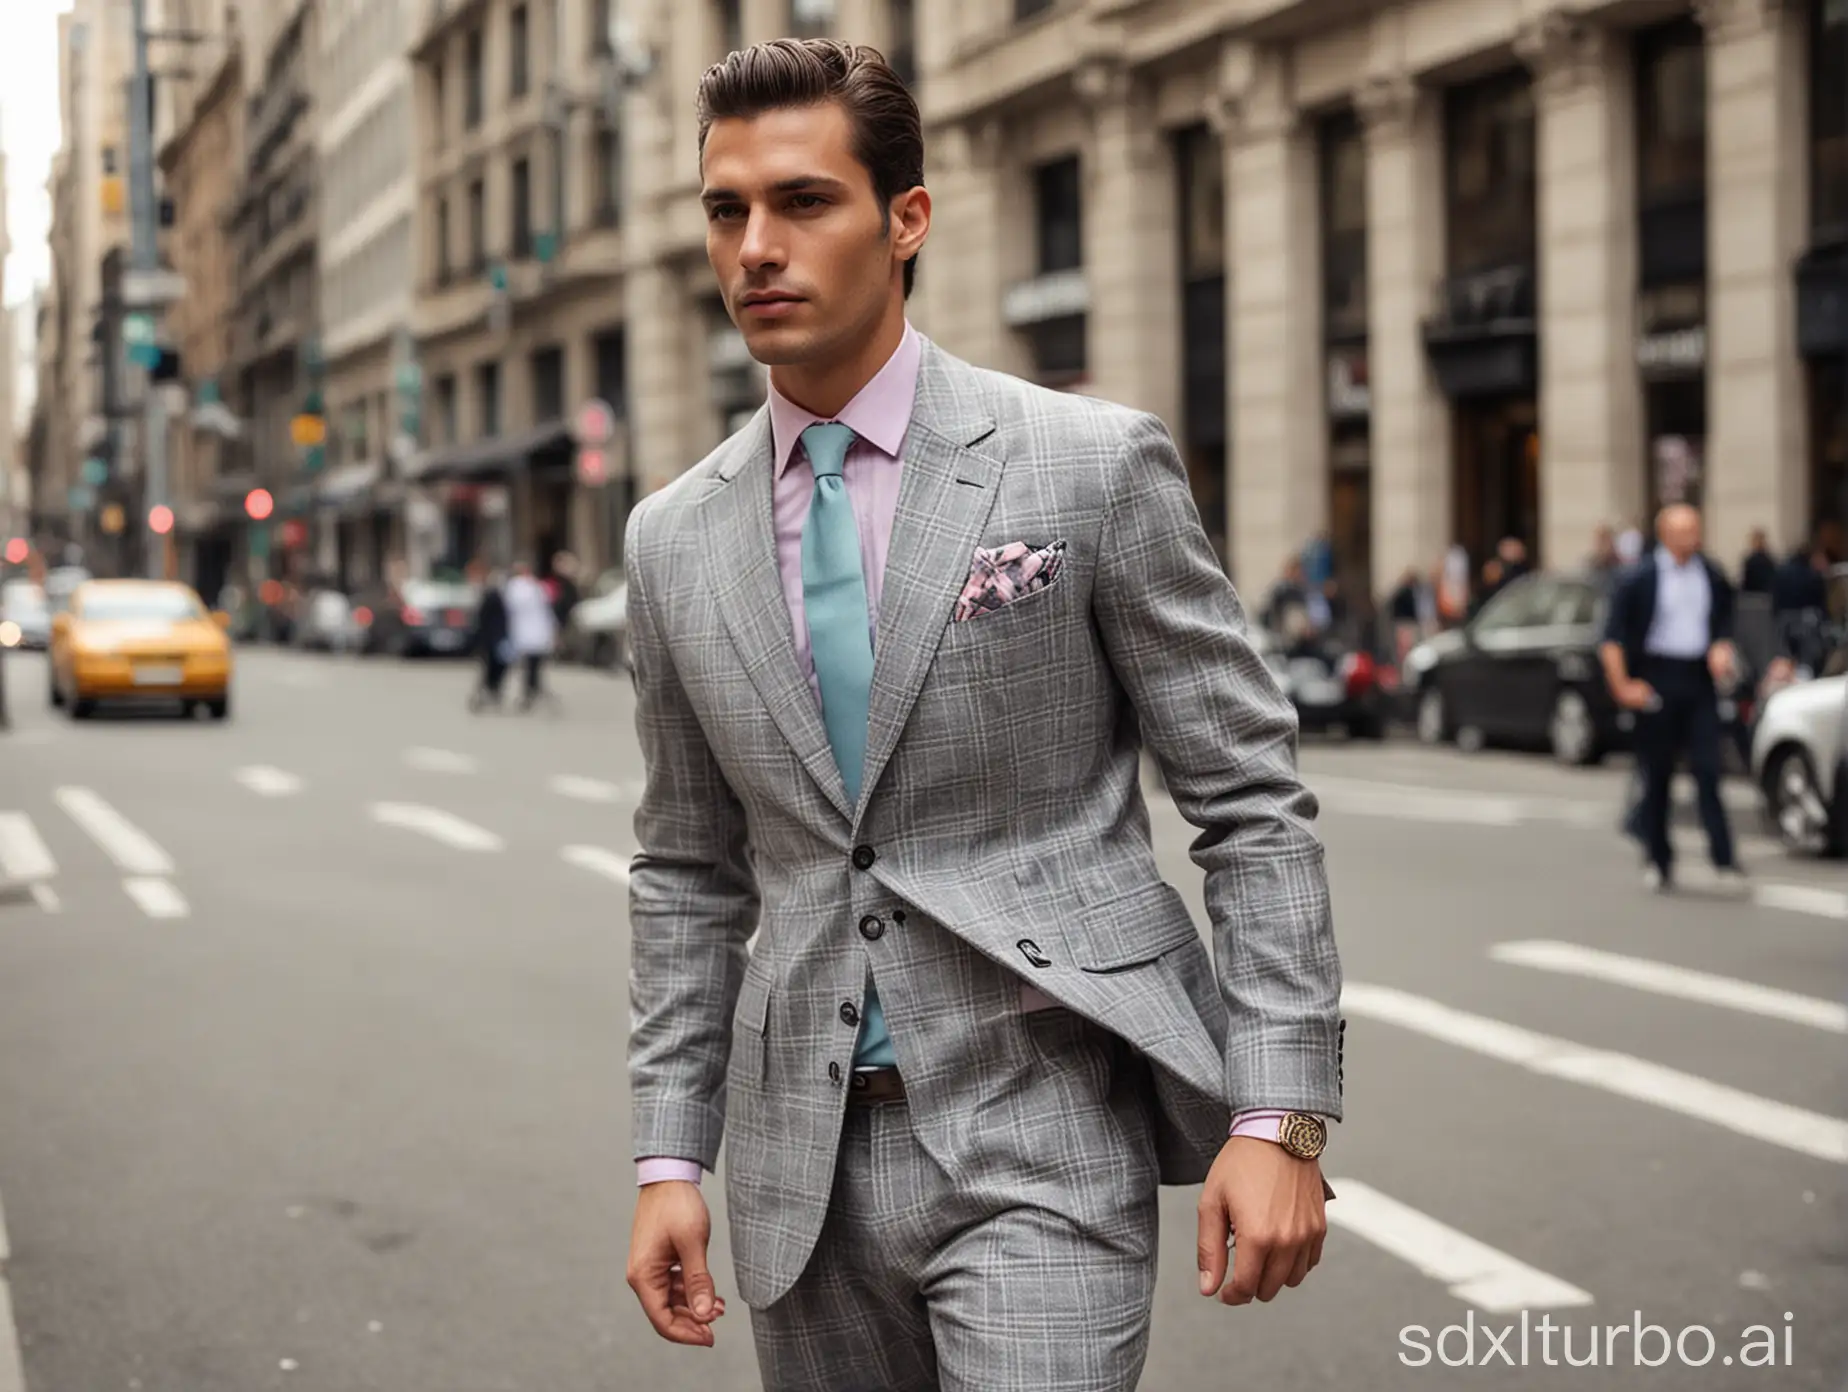 Photograph a modern man navigating city streets in a chic, grey checkered suit paired with a pastel shirt, exuding confidence and sophistication.